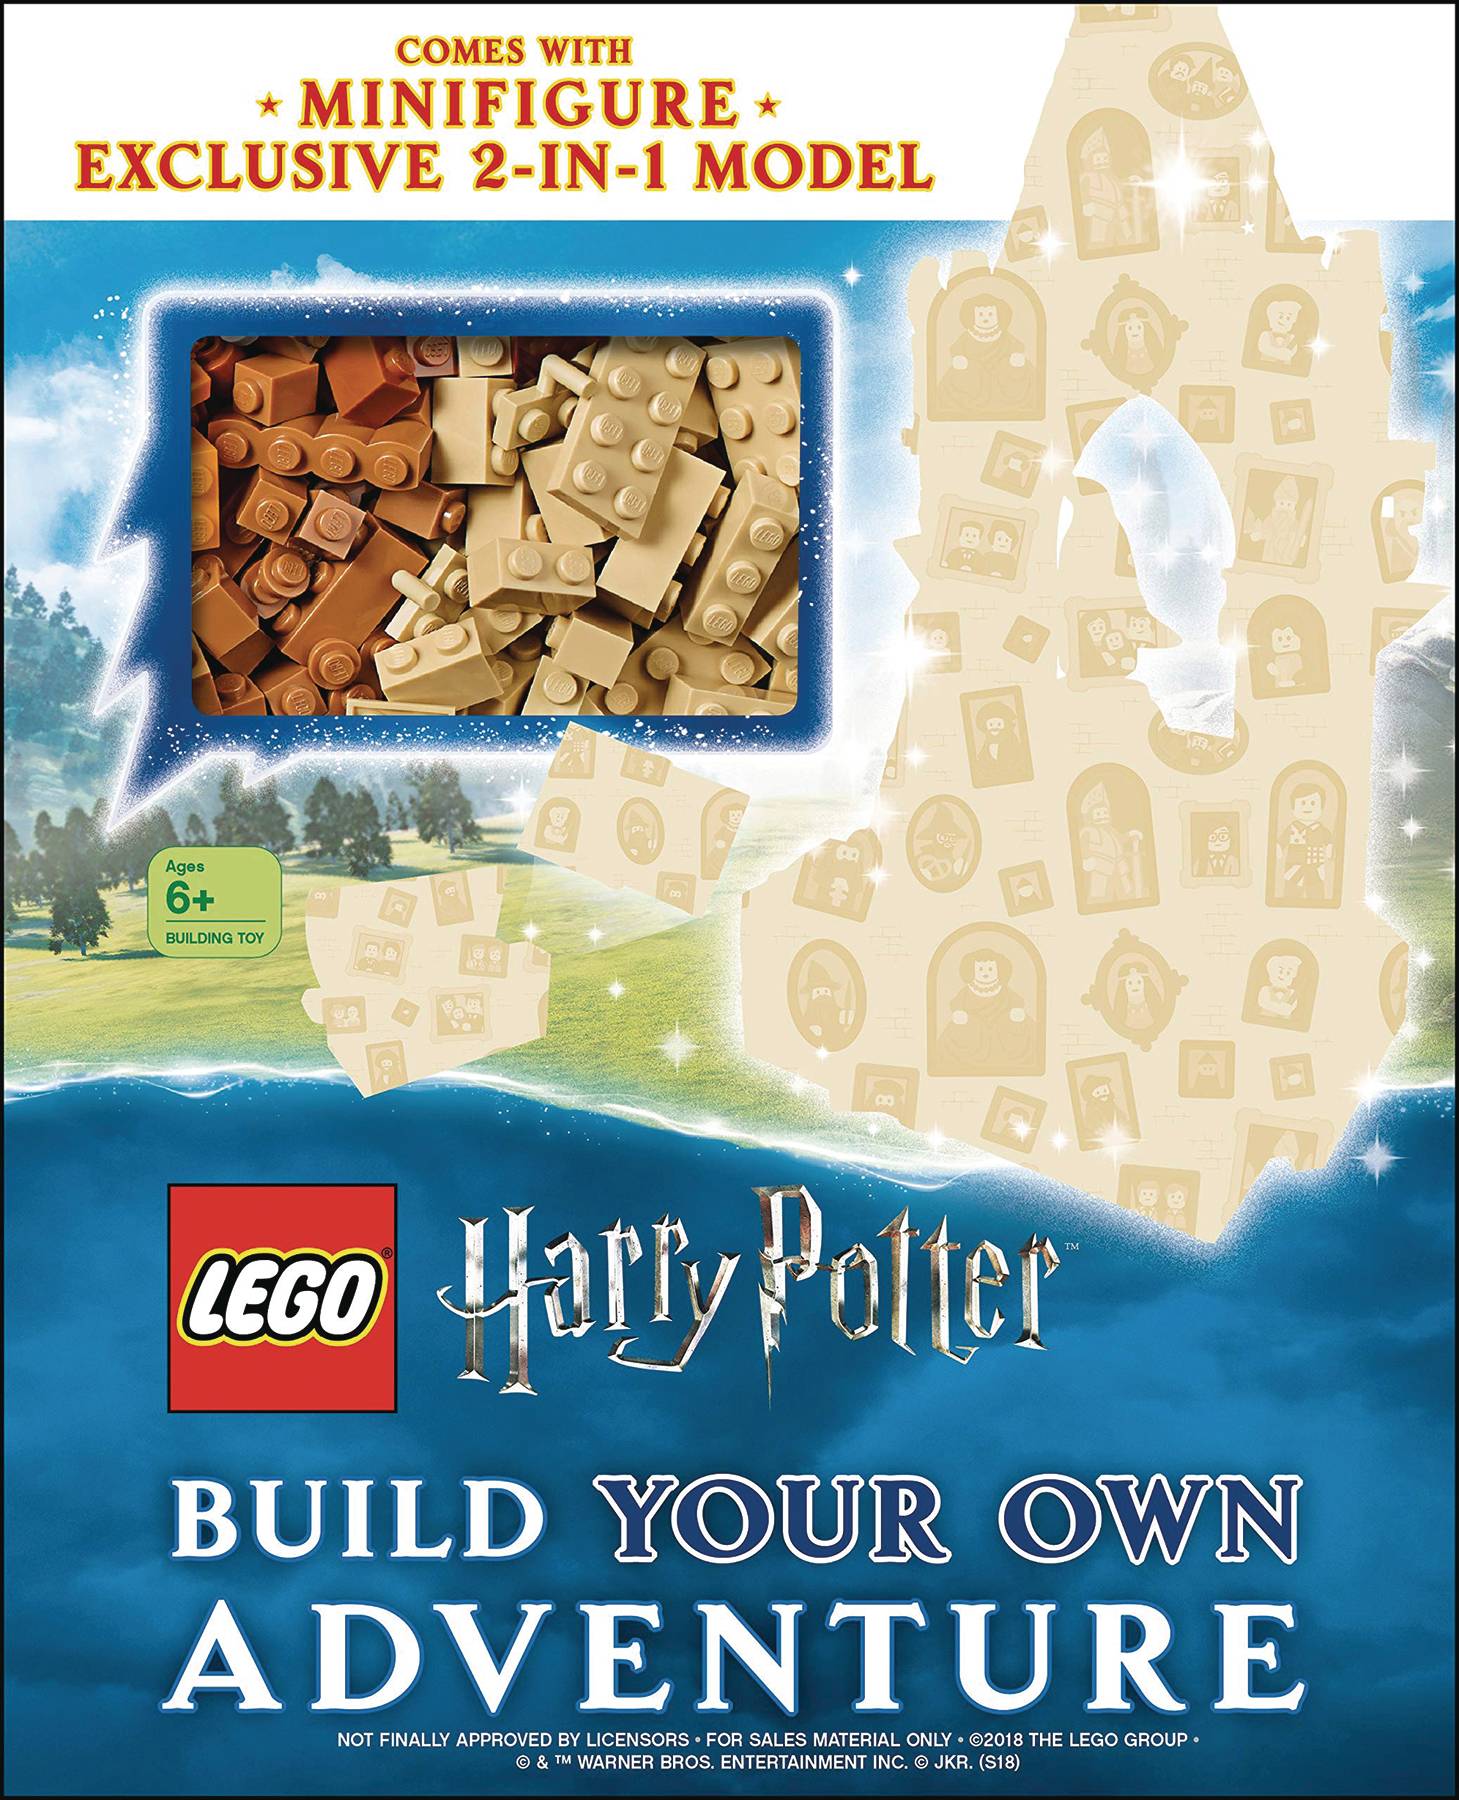 Lego Harry Potter Build Your Own Adventure With Mini Figure